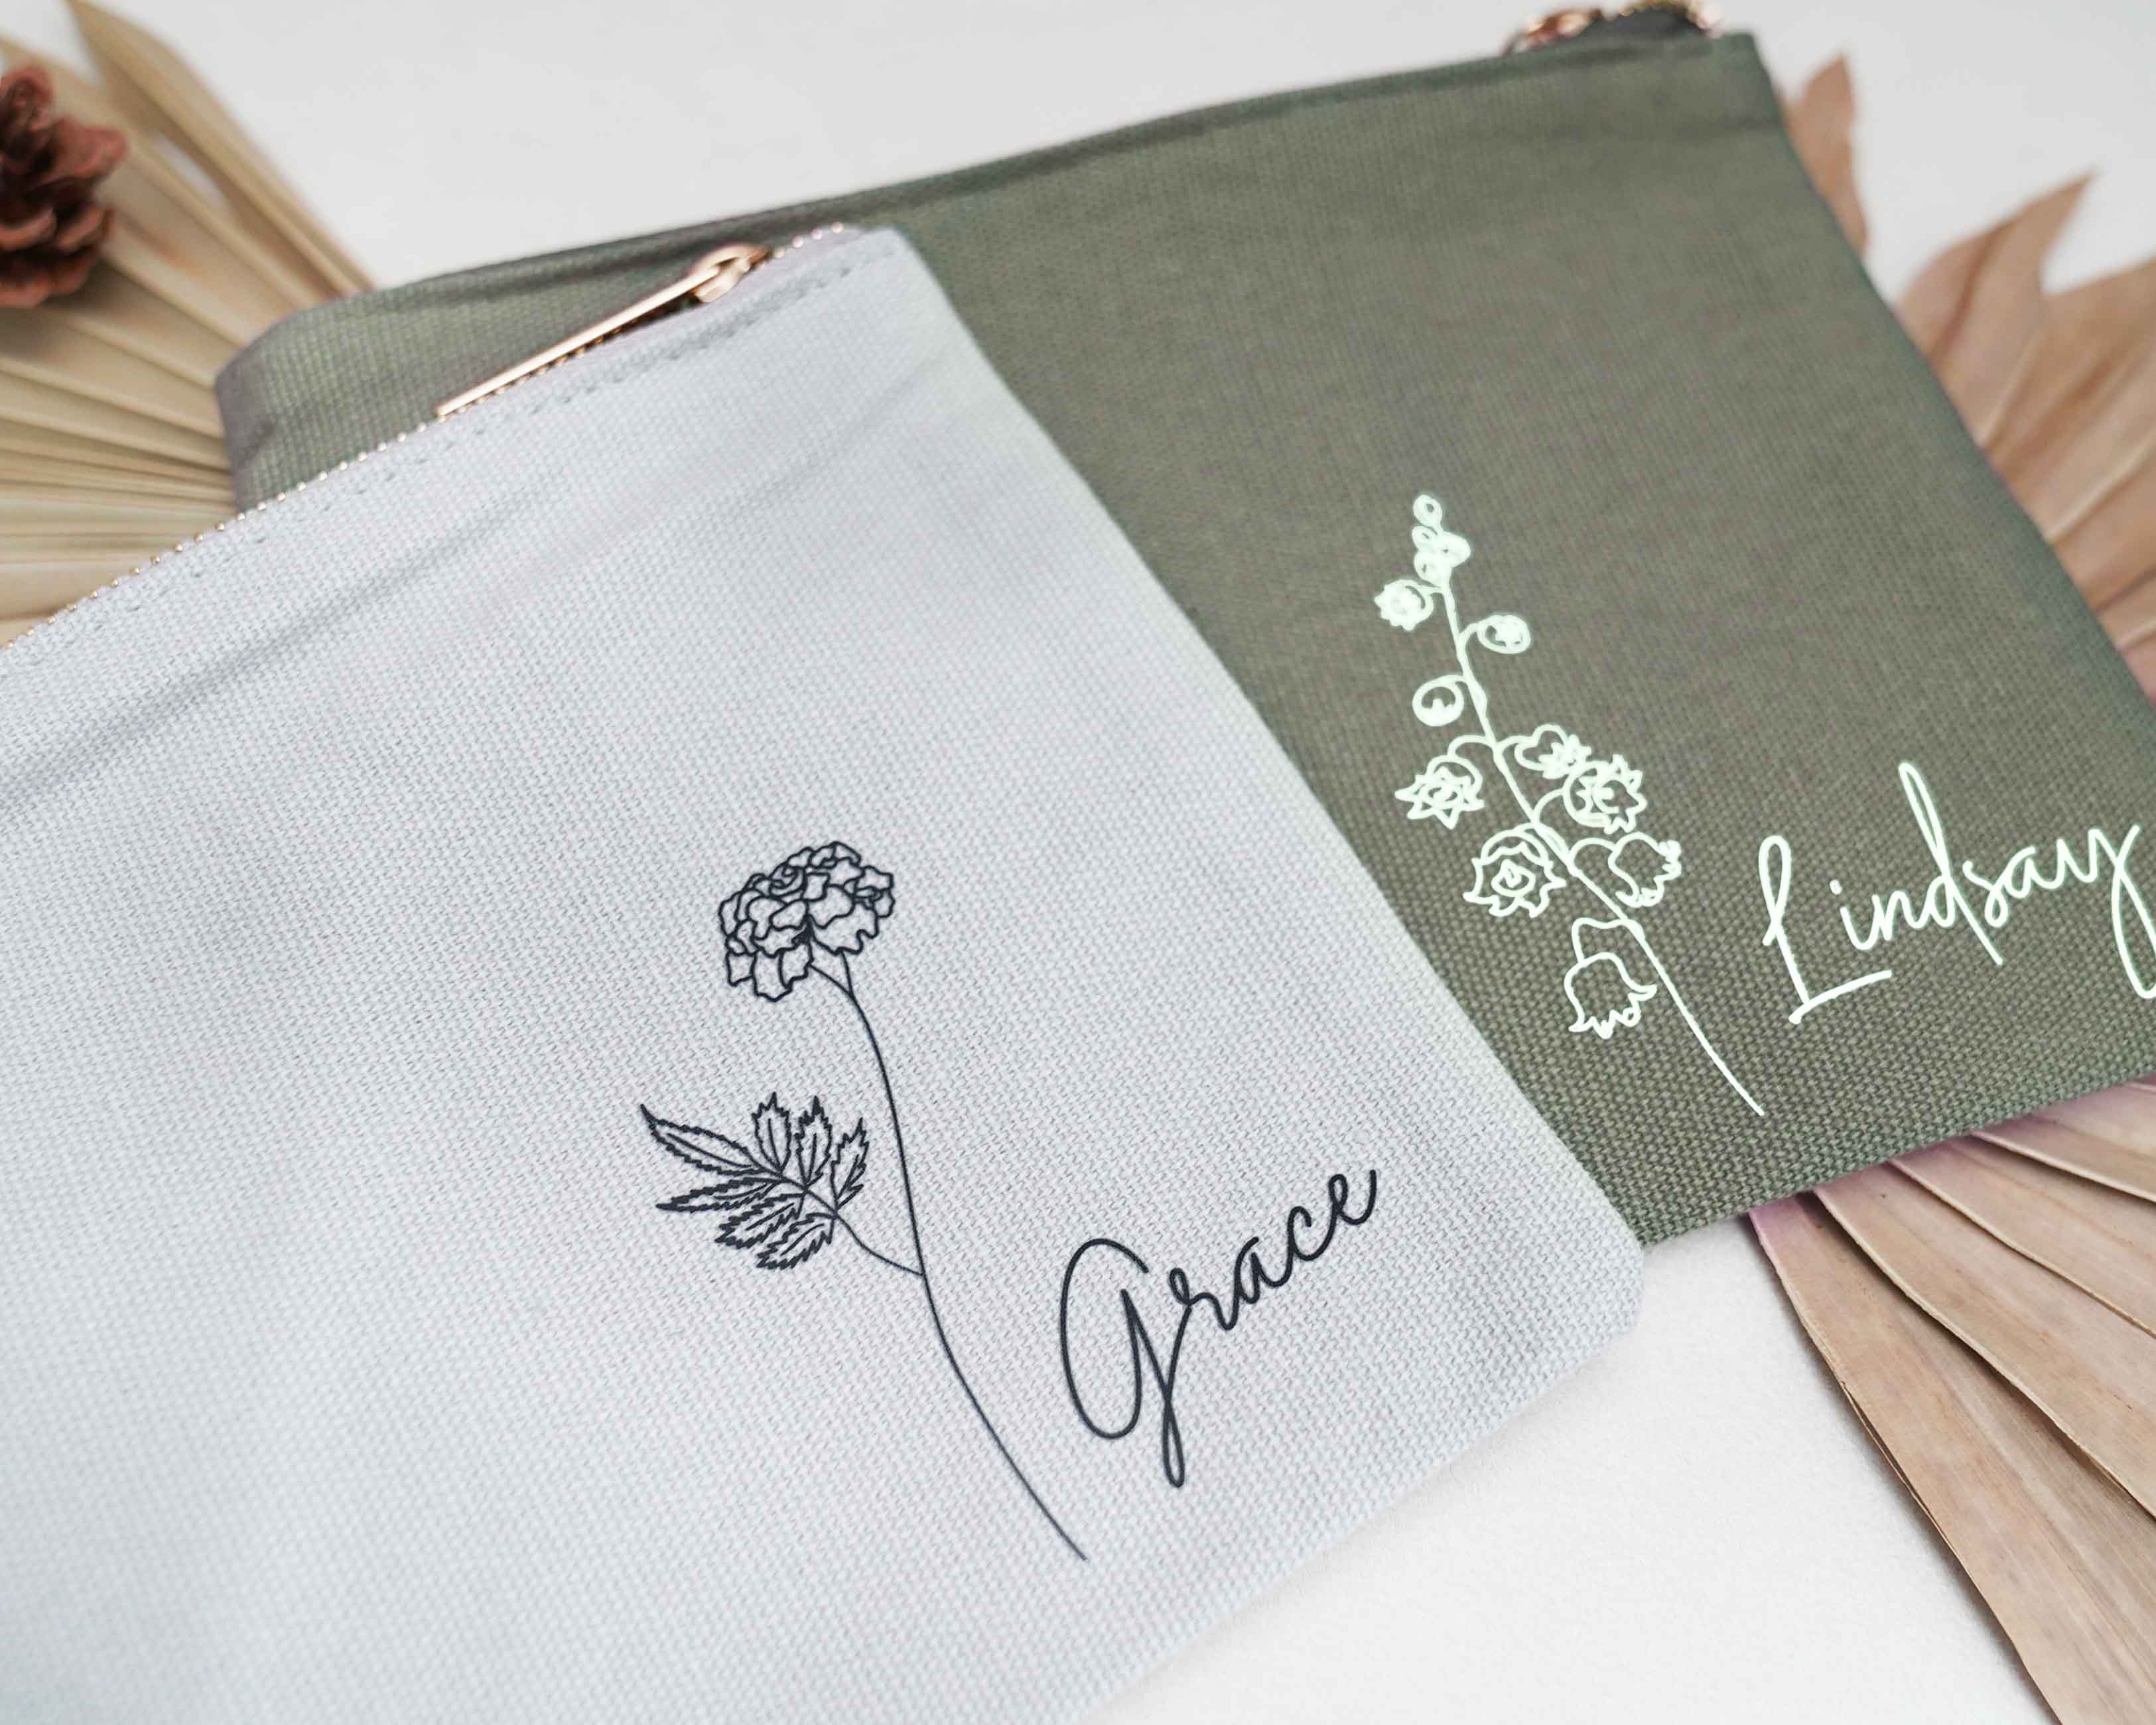 Gray and Sage Personalized Cosmetic Bags with birth flower image and name.